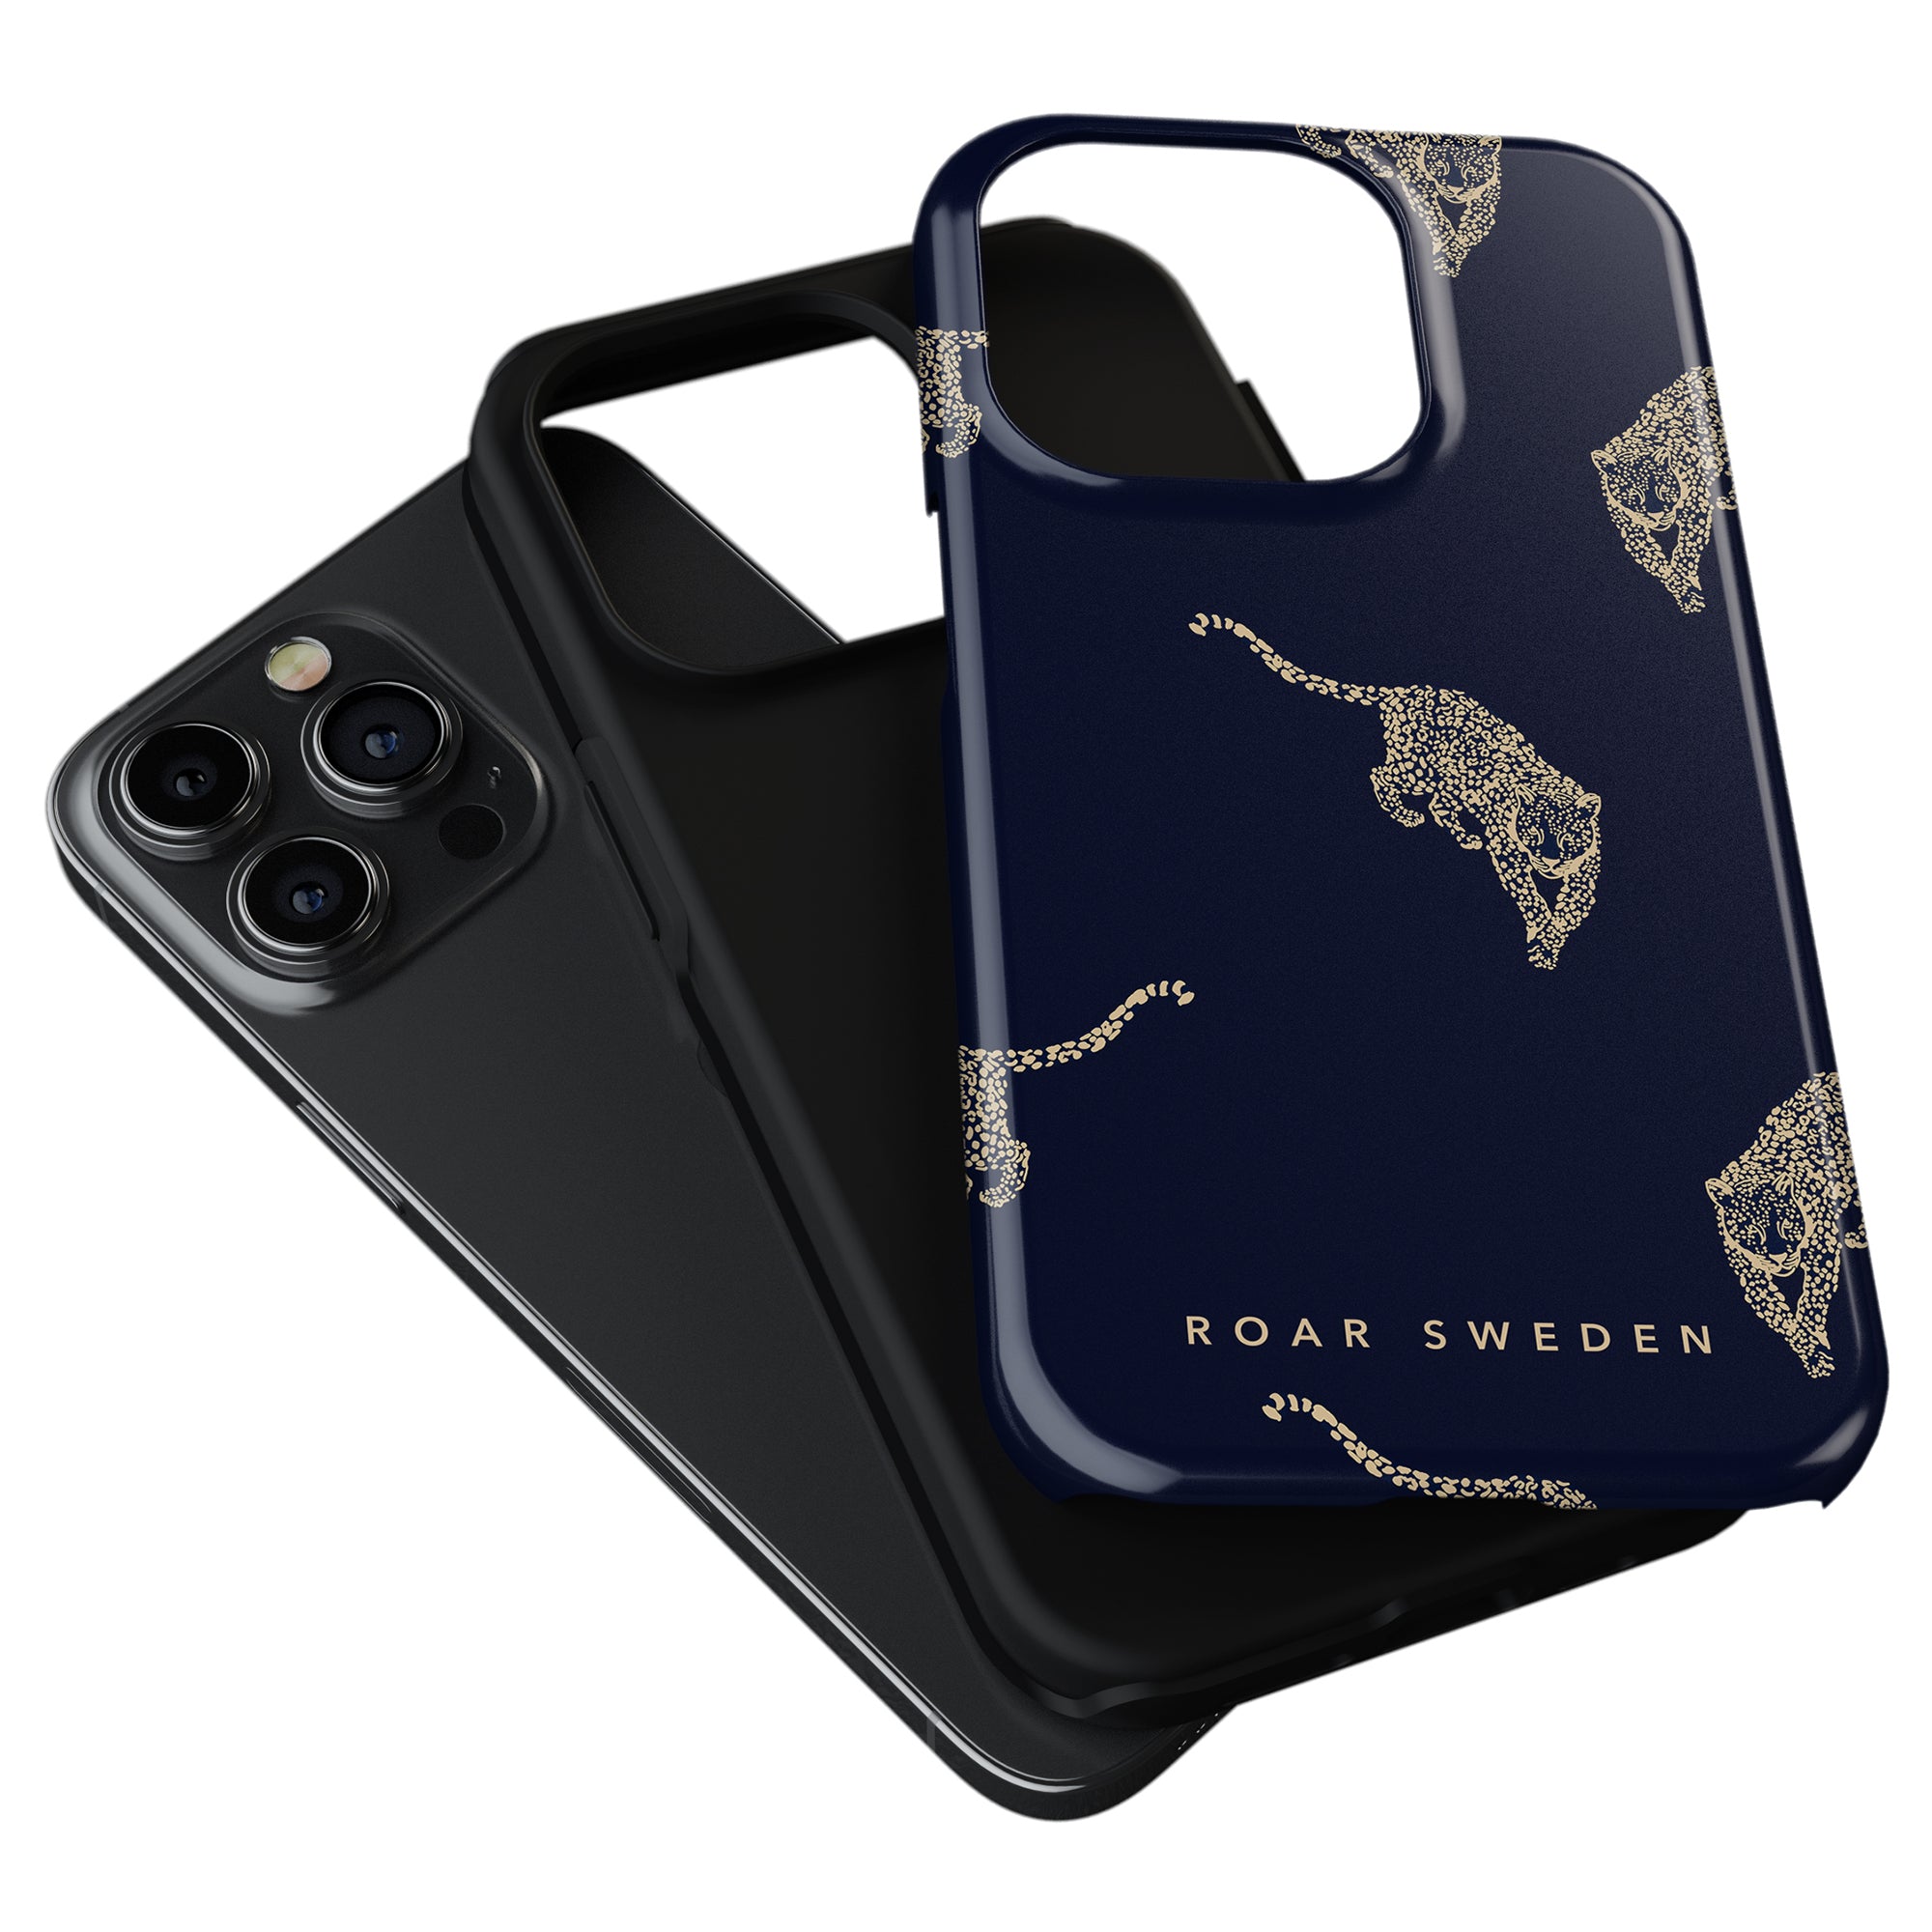 Ross Sanders' Kitty Grand - Tough Case offers both style and protection. The elegant cat-themed design adds a touch of personality while also providing added durability, helping to extend the lifespan of your phone.